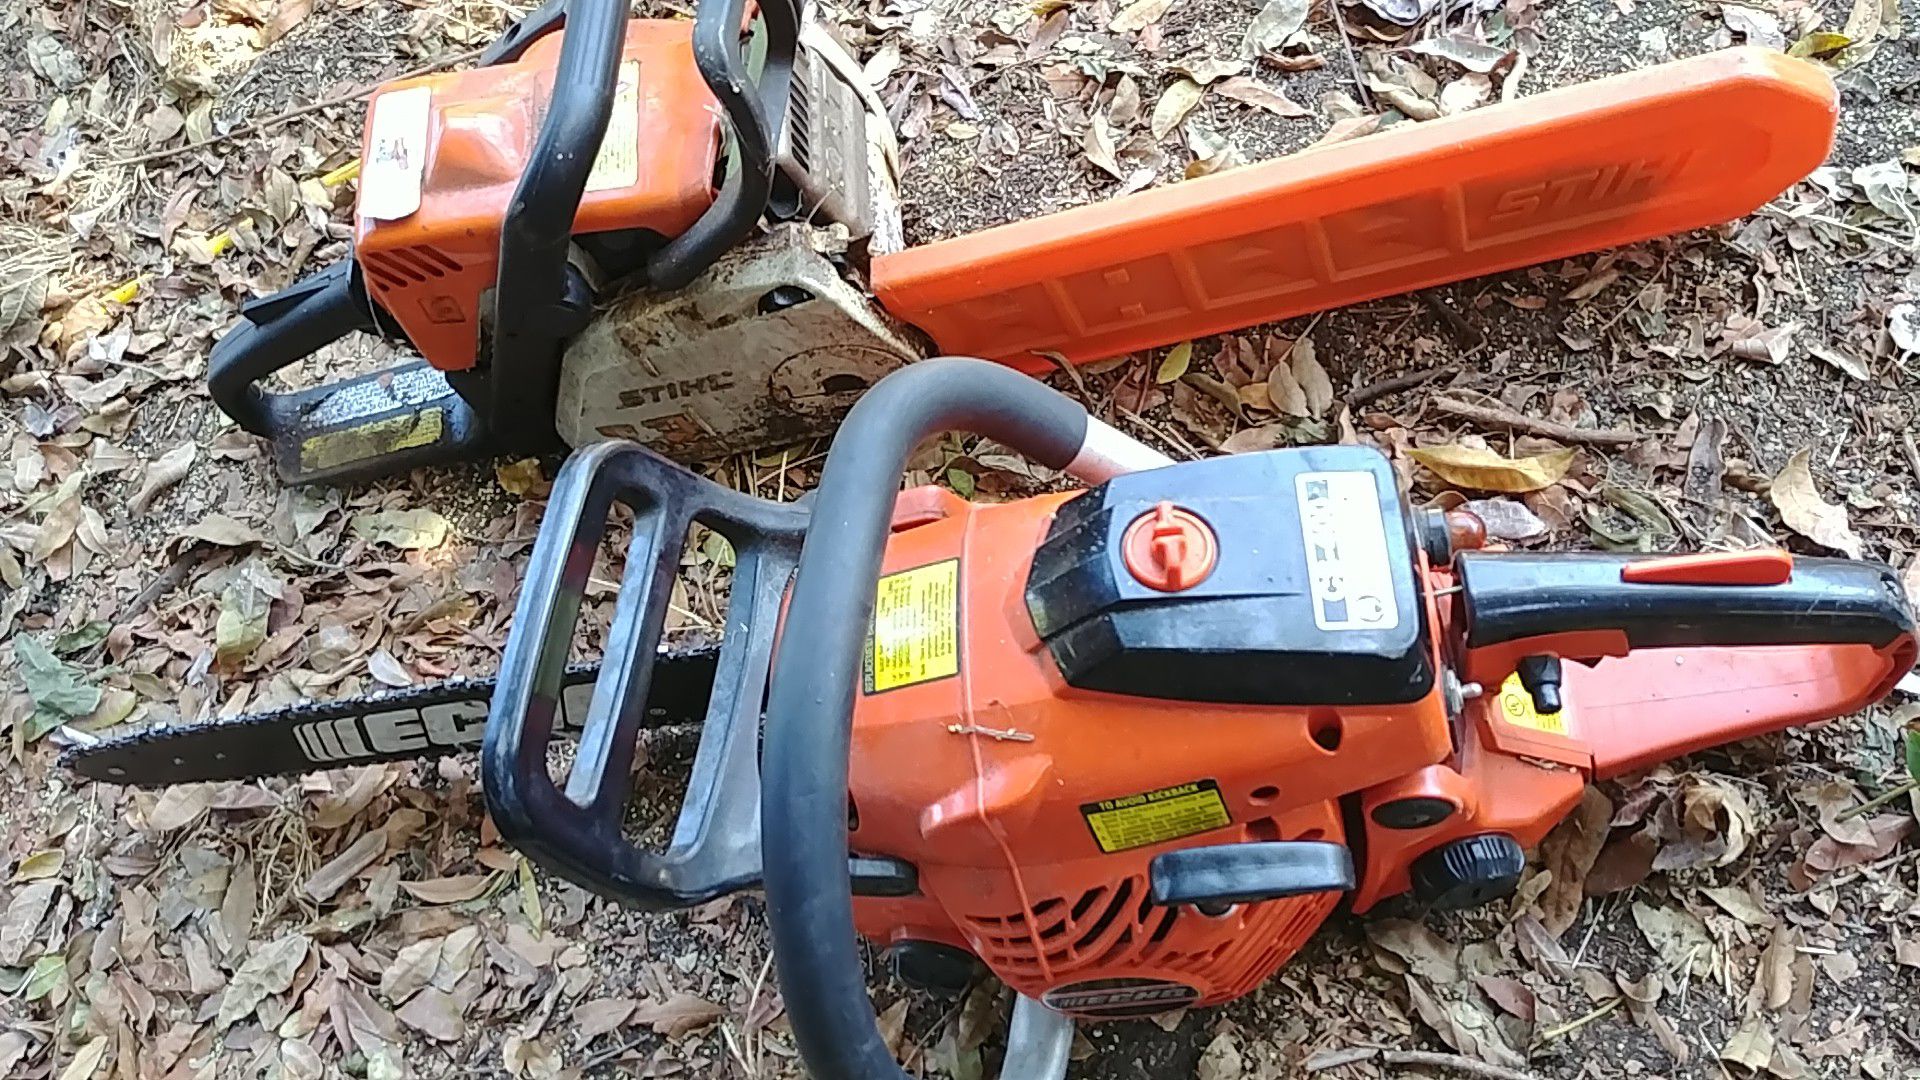 Two small arborist chainsaw Stihl and Echo